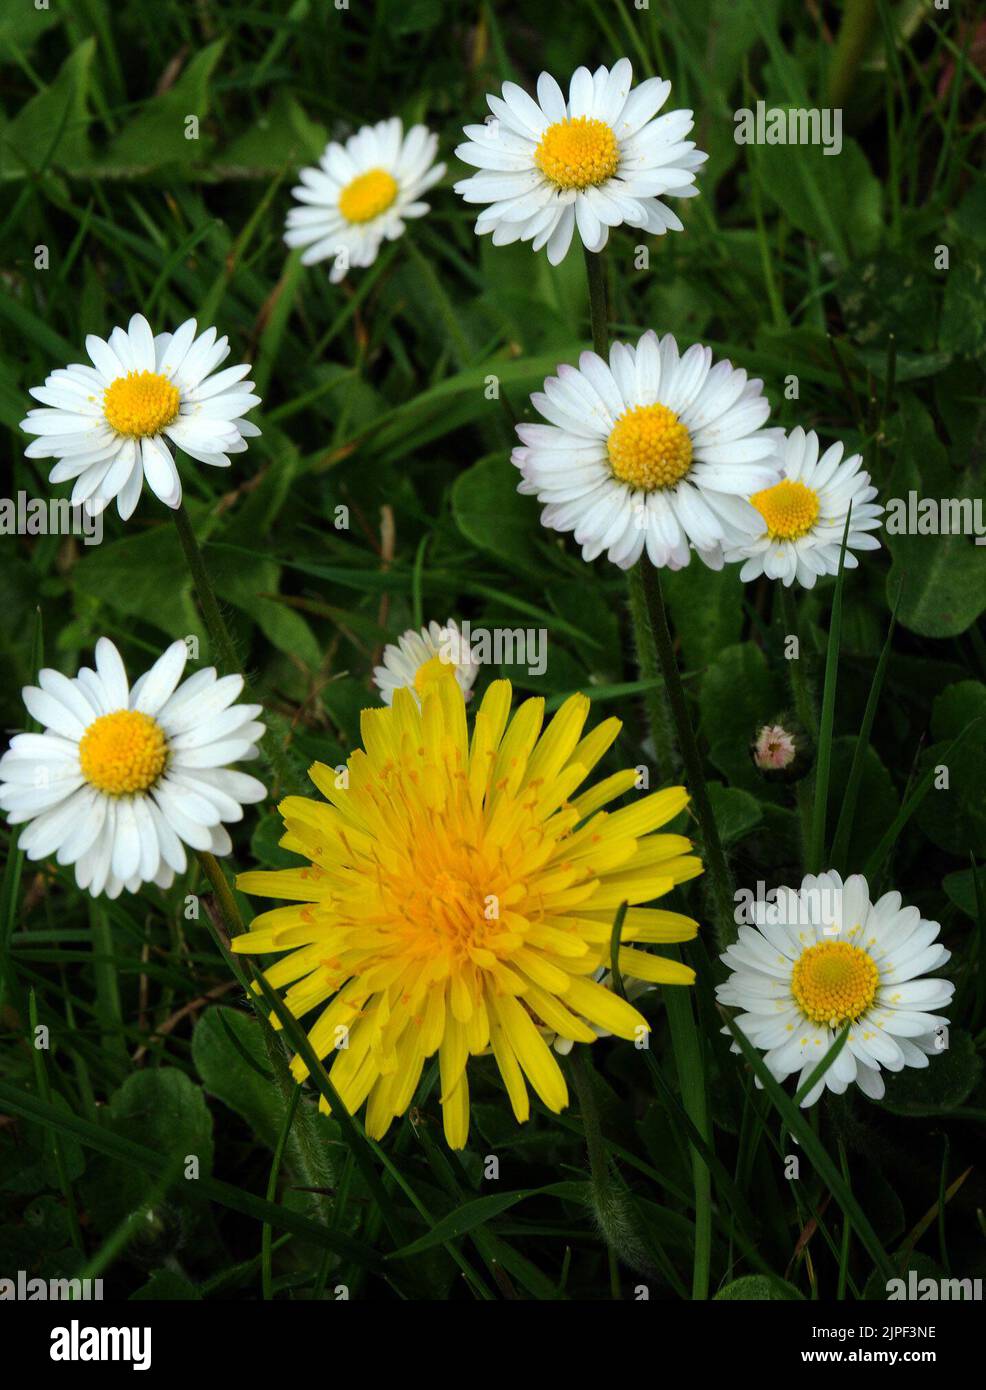 WARM SPRING TEMPERATURES AND LONG SPELLS OF SUNSHINE ARE CAUSING DANDELIONS AND DAISIES TO BLOOM IN HUGE NUMBERS ACROSS HAMPSHIREHAMPSHIRE. PIC MIKE WALKER, MIKE WALKER PICTURES, 125 THE KEEP, PORTCHESTER, HANTS PO16 9PR TEL. 07747012287 e.mail. walker.mike@ntlworld.com Stock Photo